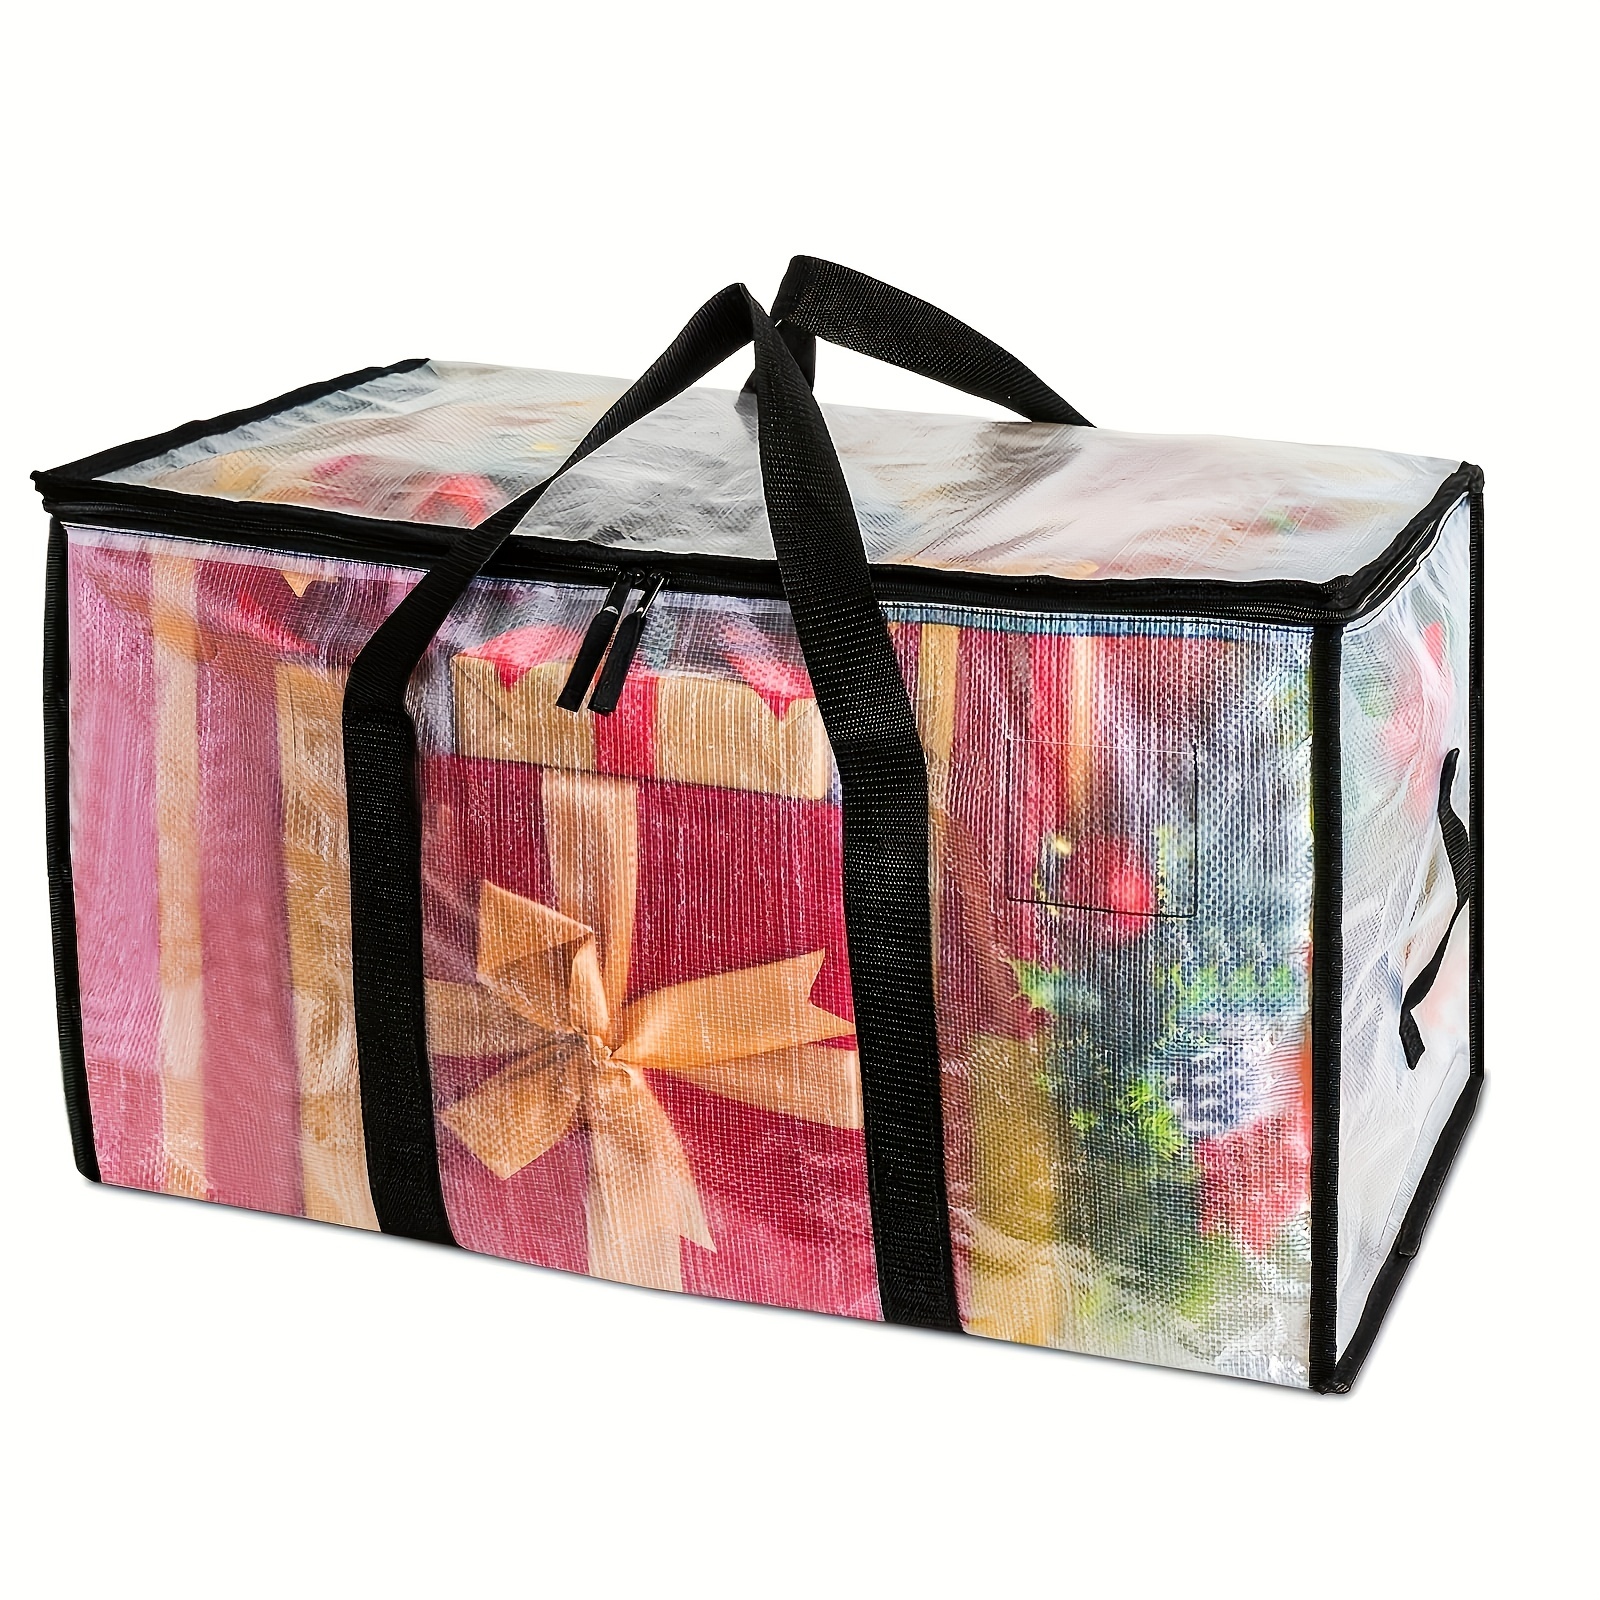 Happy Cheers Moving Bags, Storage Totes, Extra Large Storage Bags for Moving Supplies, College Dorm Essentials, Bedroom Closet, Packing Bags with Backpack